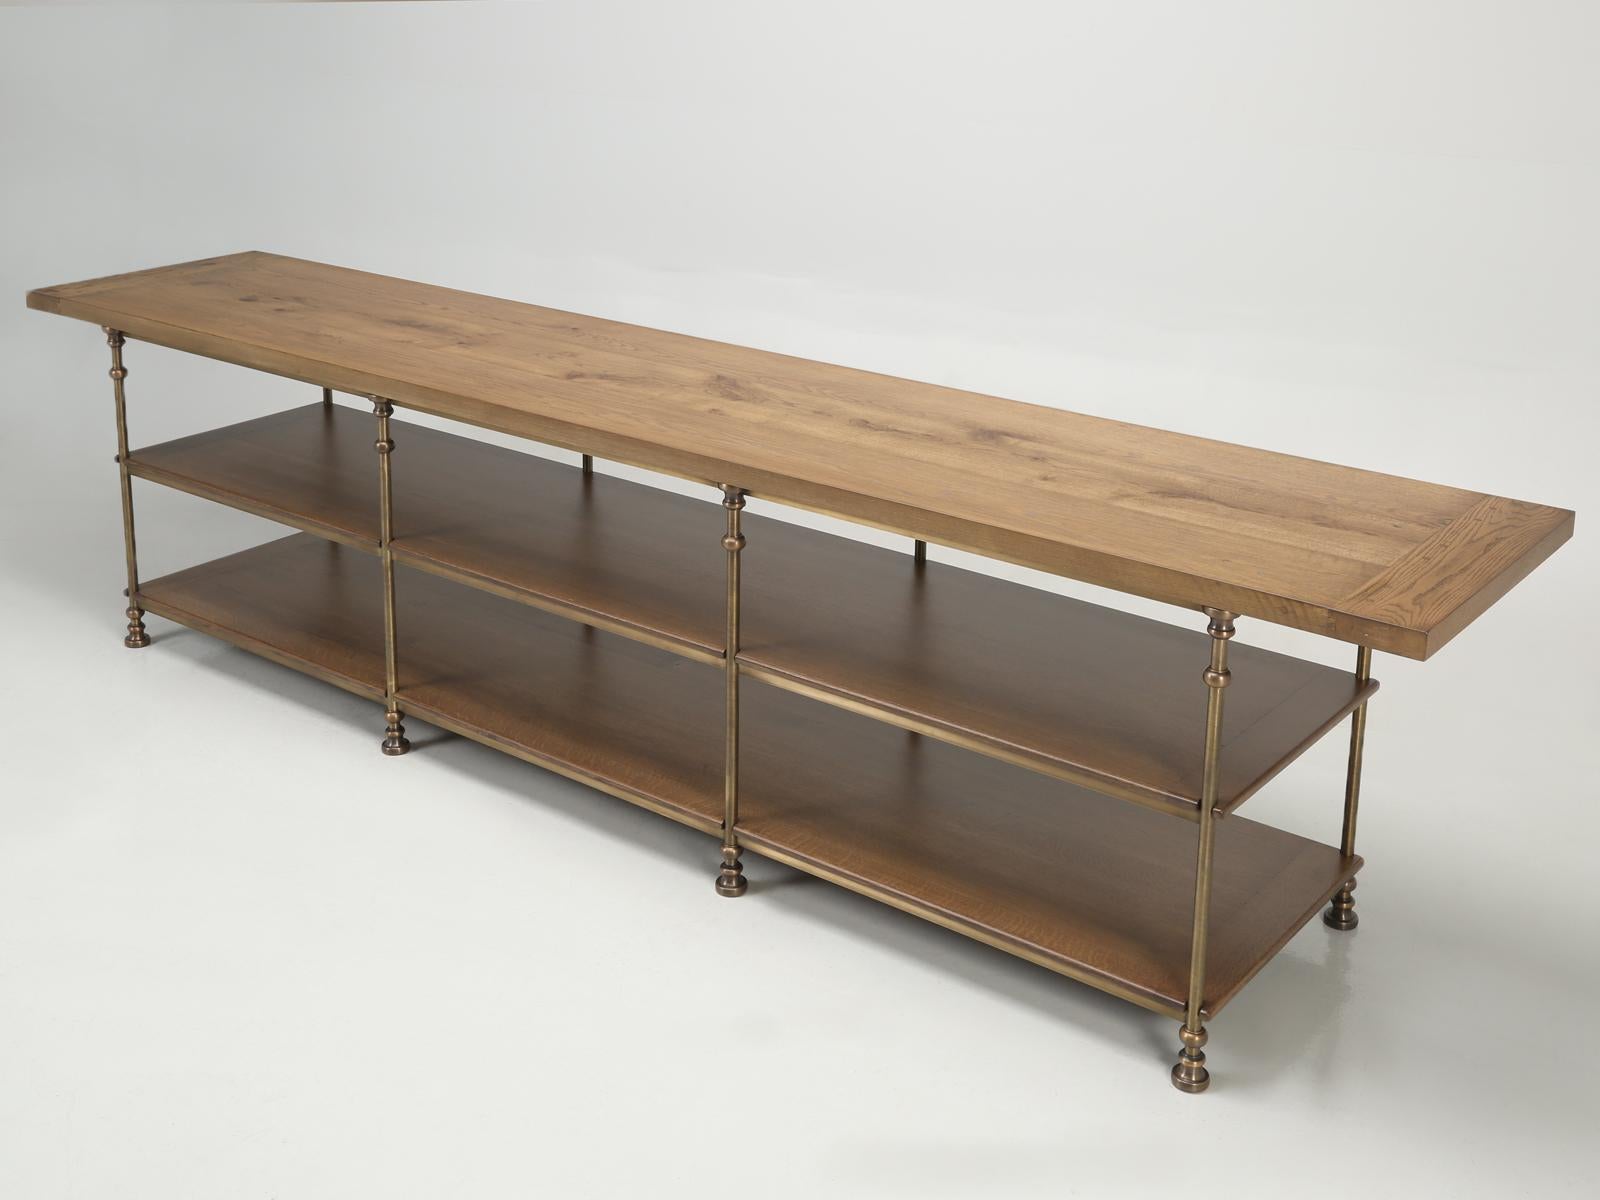 Old Plank's Stainless Steel and Bronze Kitchen Island with Carrera Marble For Sale 9